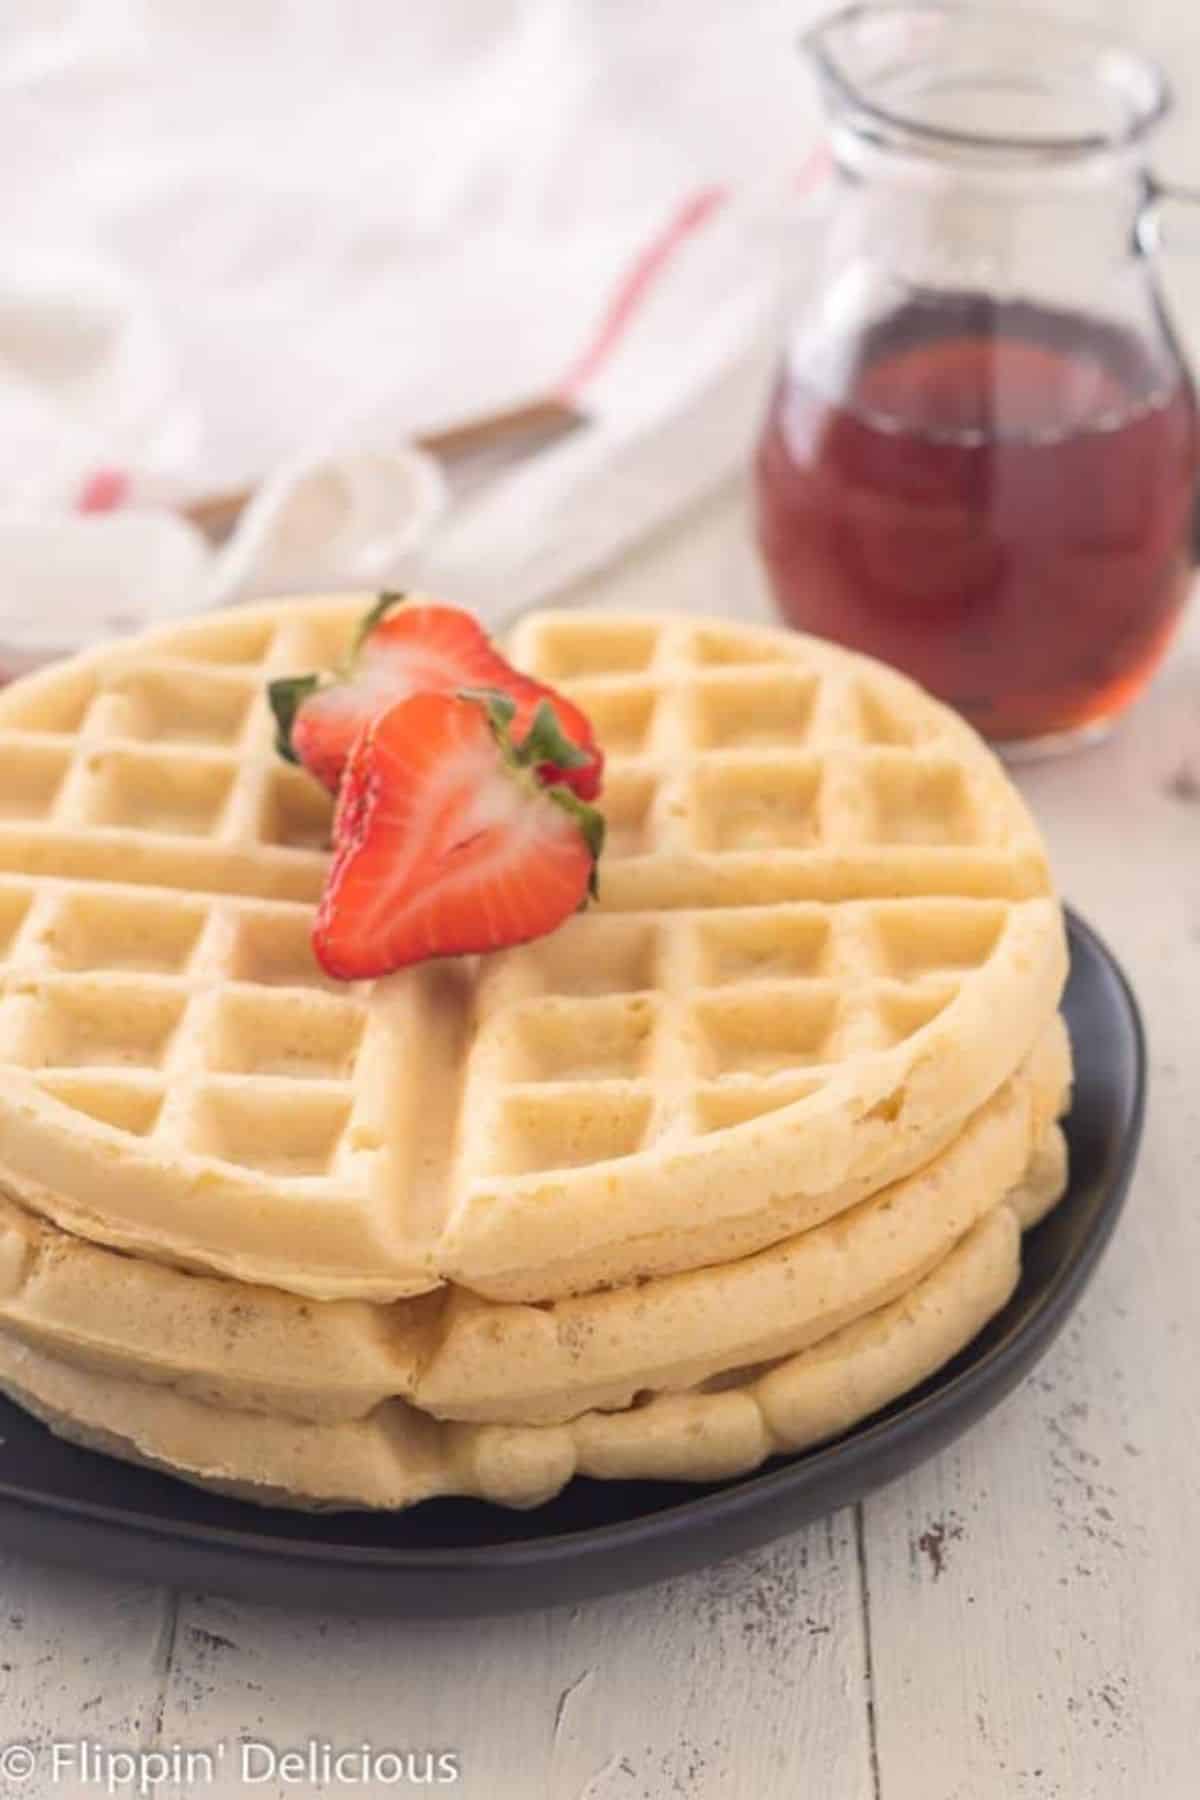 A pile of Gluten-free Waffles with a sliced strawberry on a black plate.